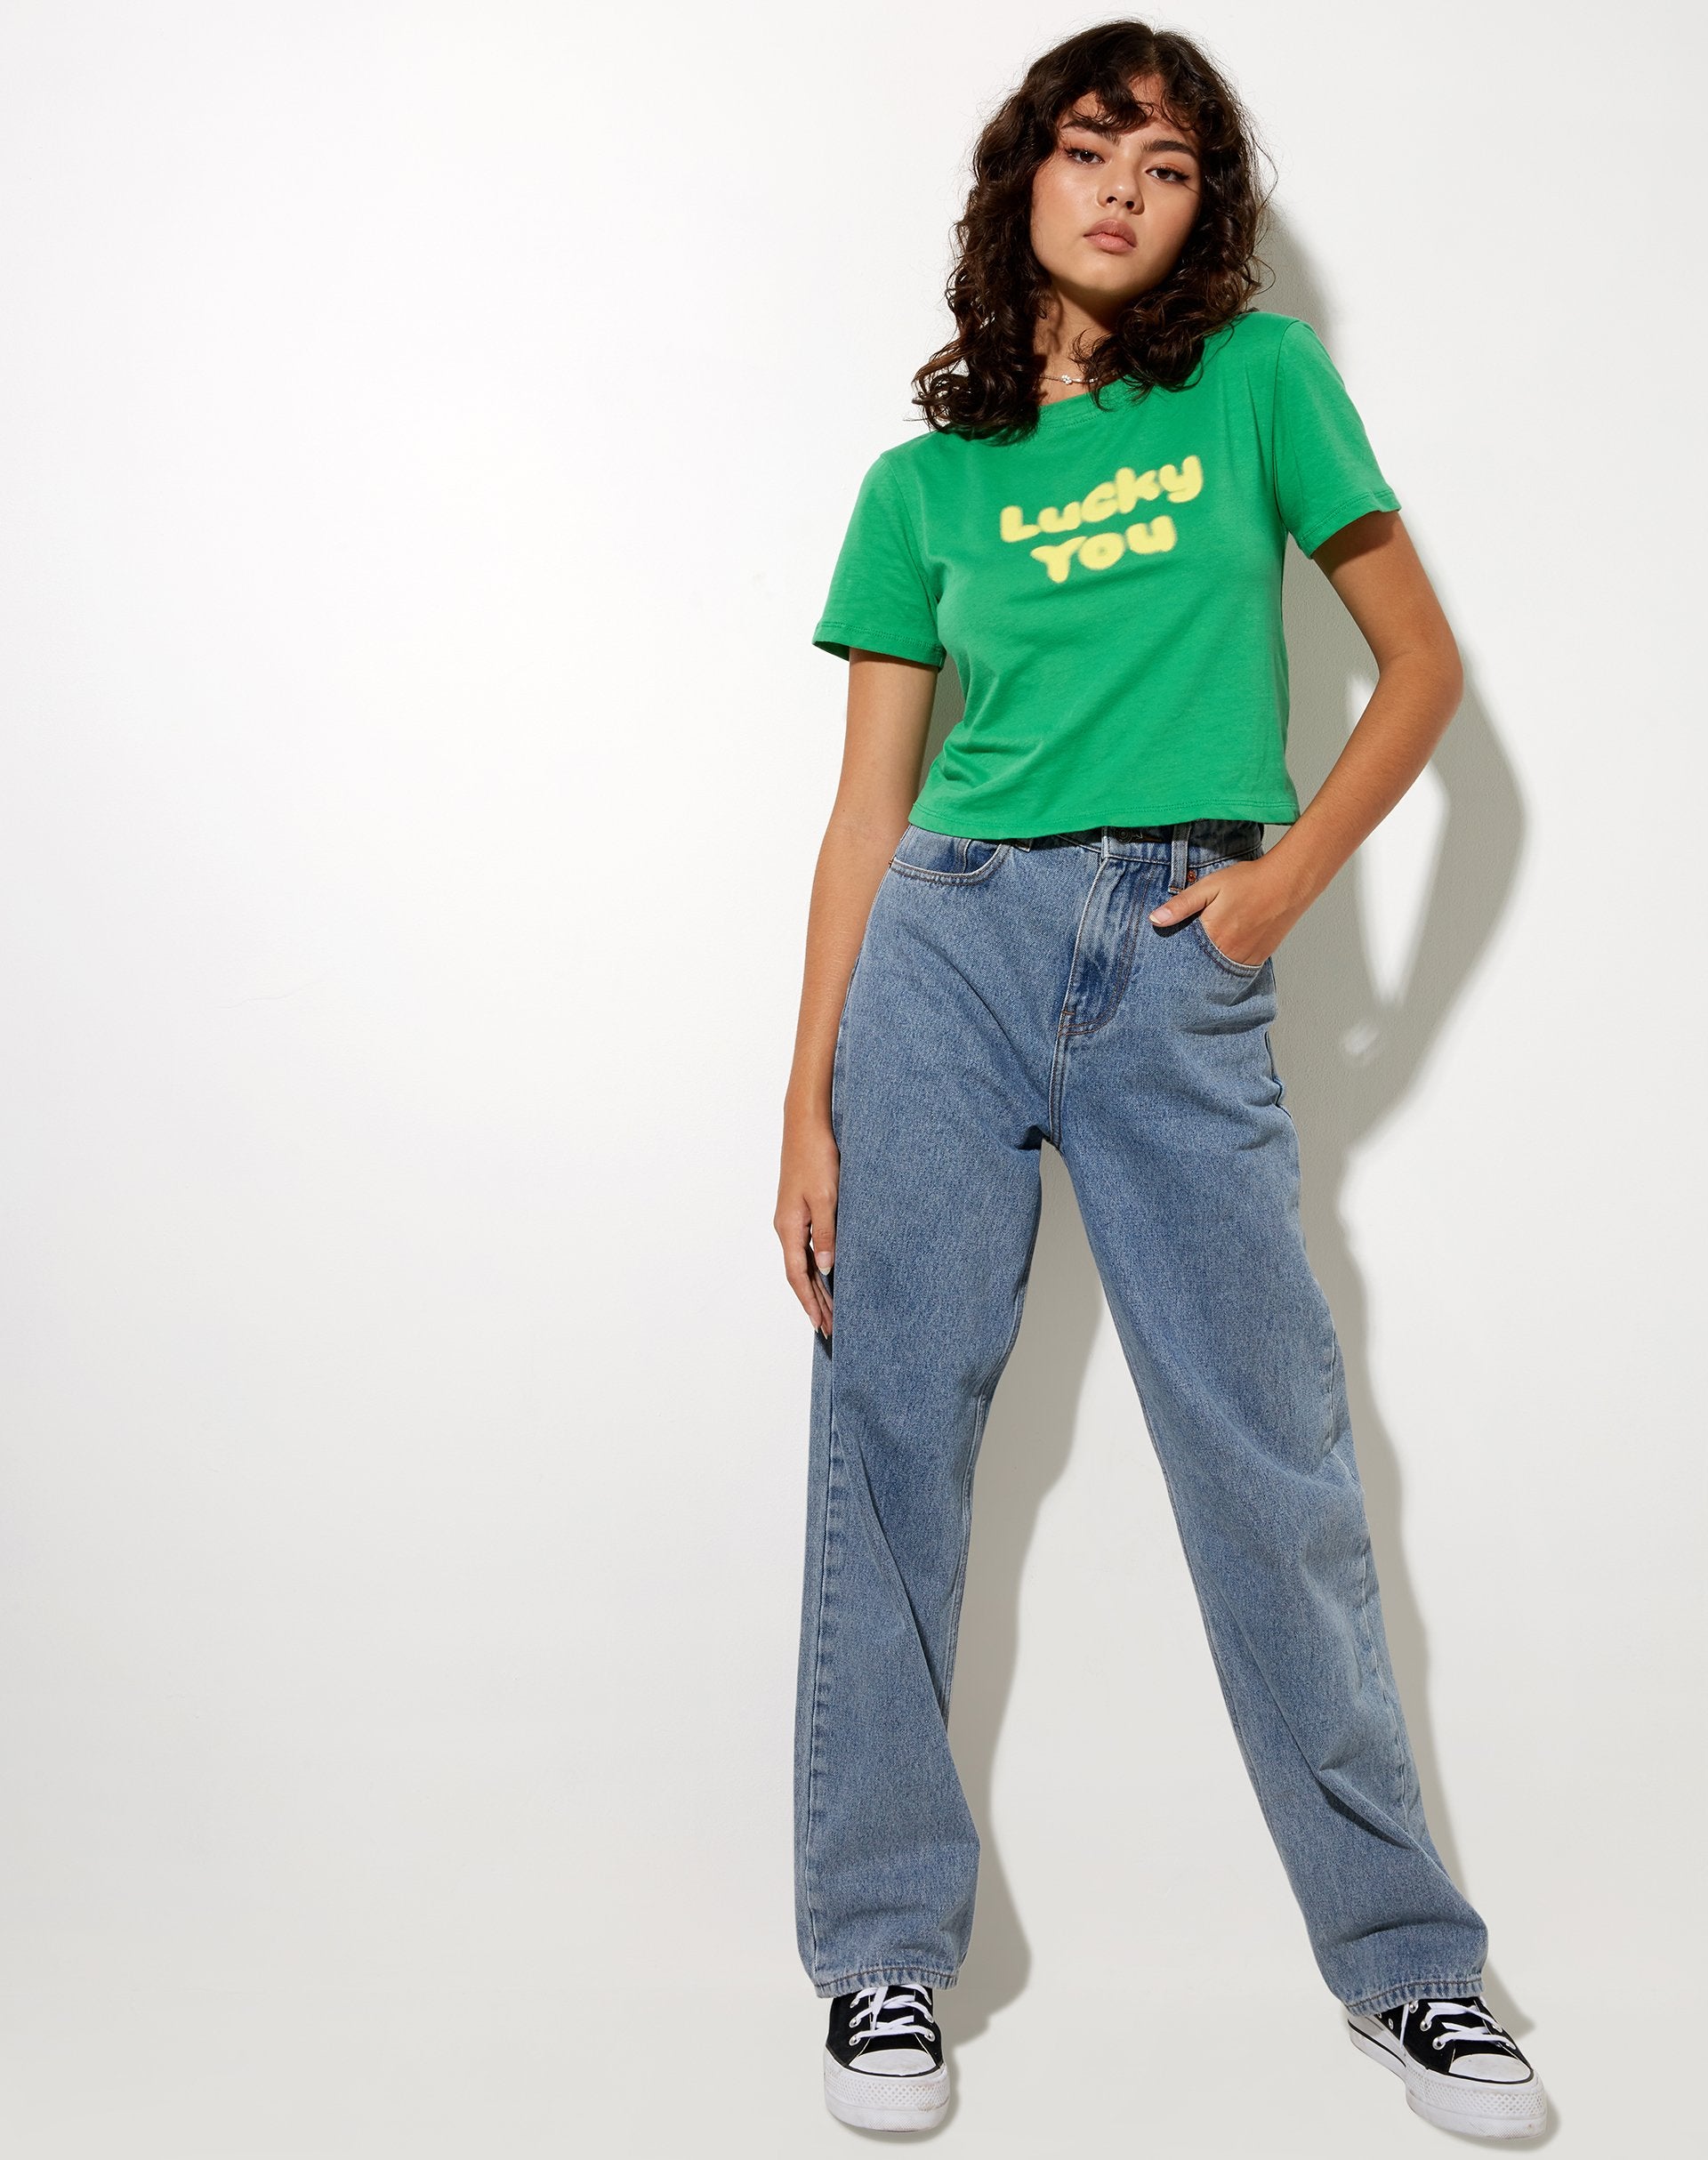 Image of Shrunk Tee in Green Lucky you